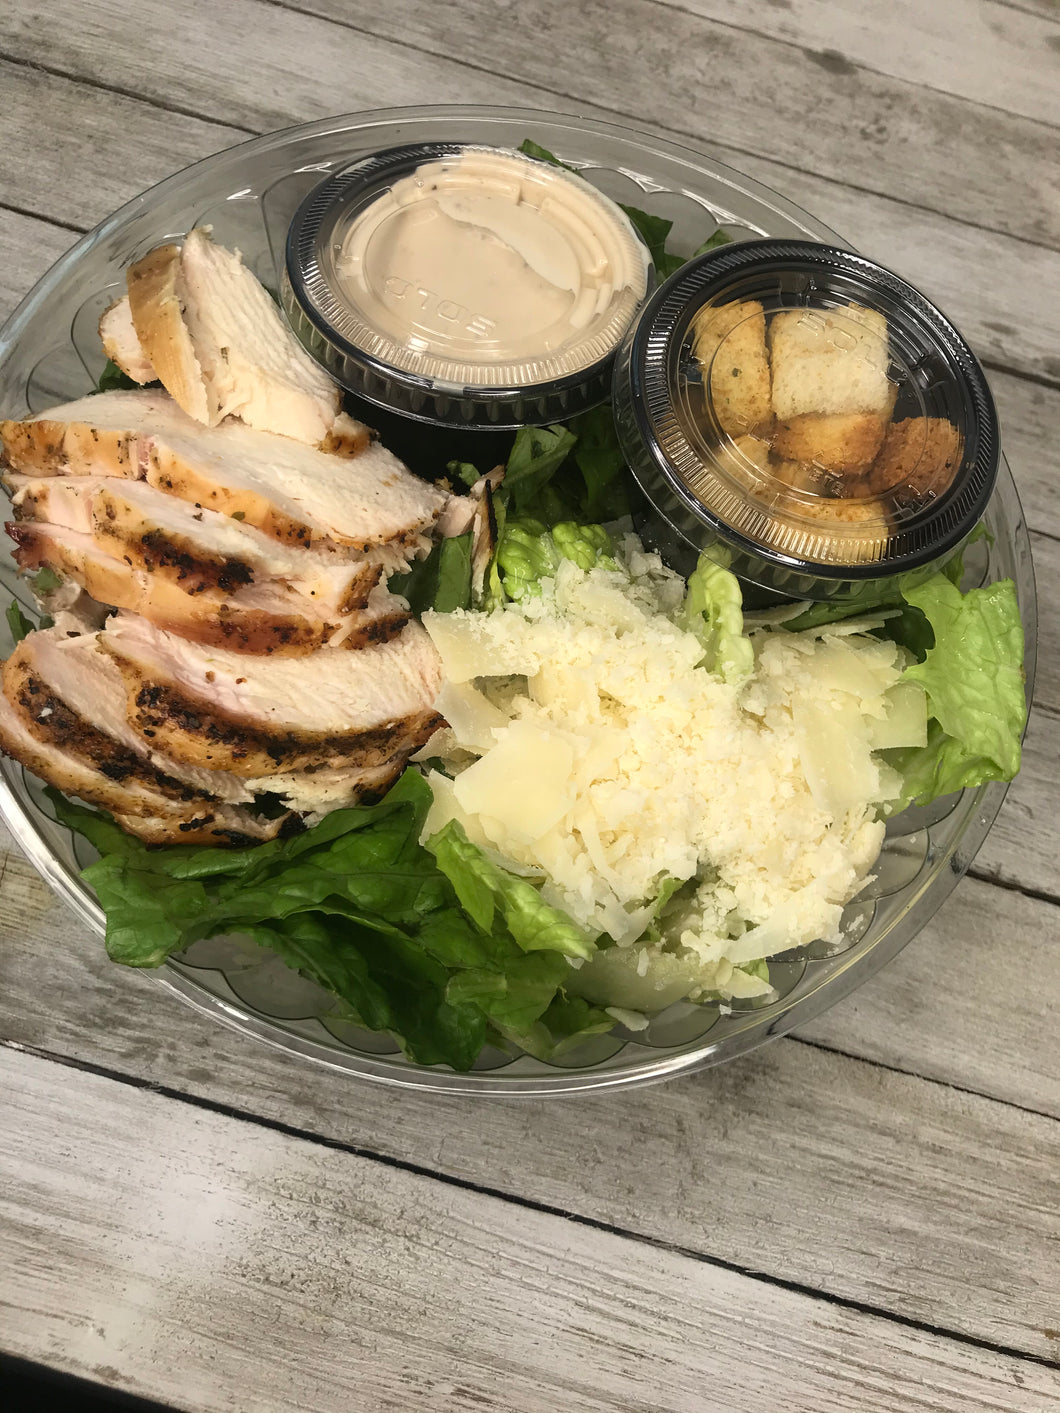 Caesar salad with grilled chicken, shrimp or roasted chickpeas